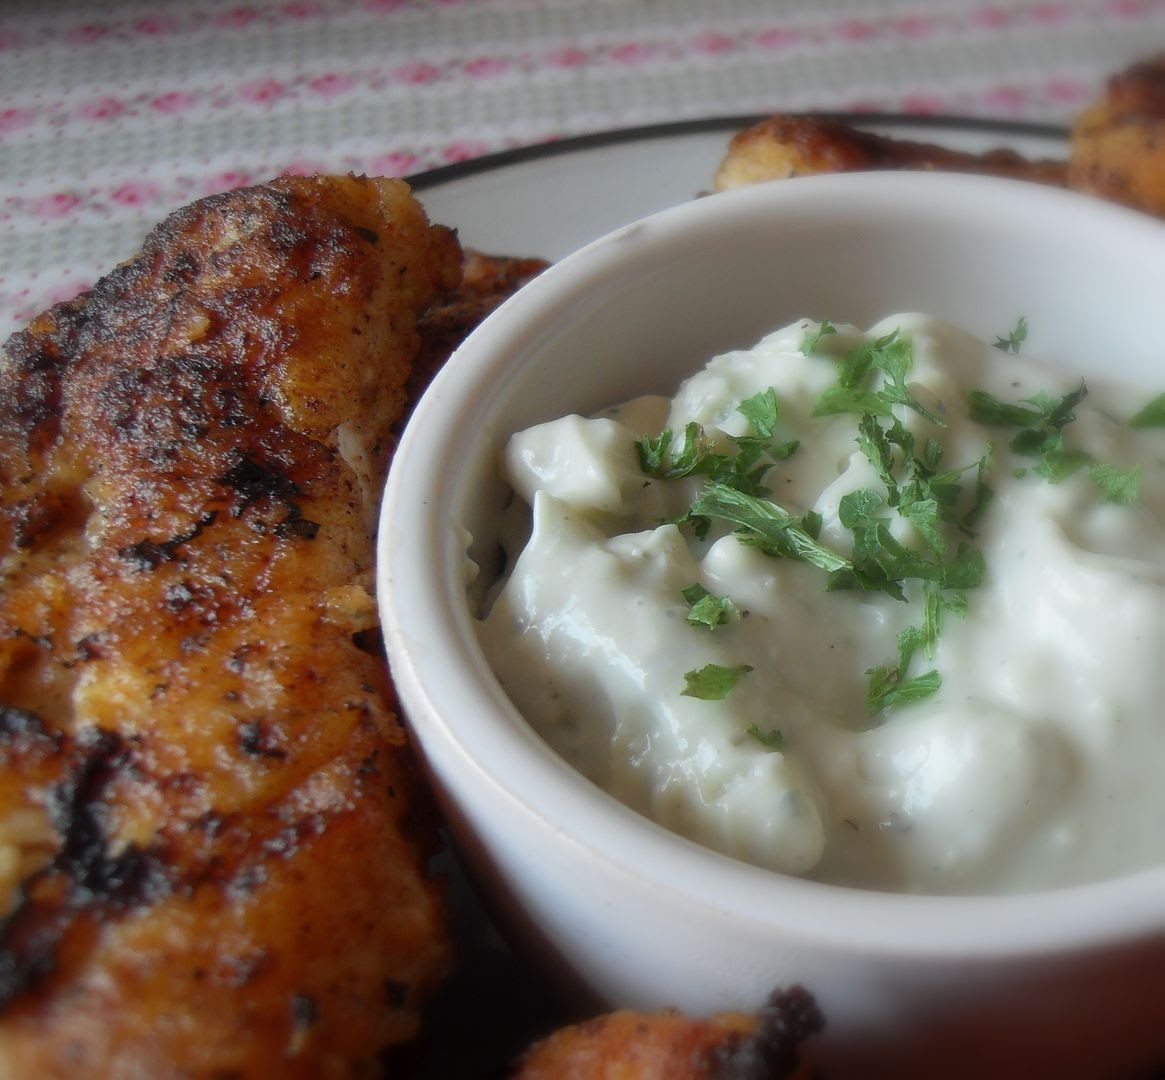 Fiery Chicken Tenders with Blue Cheese Dip